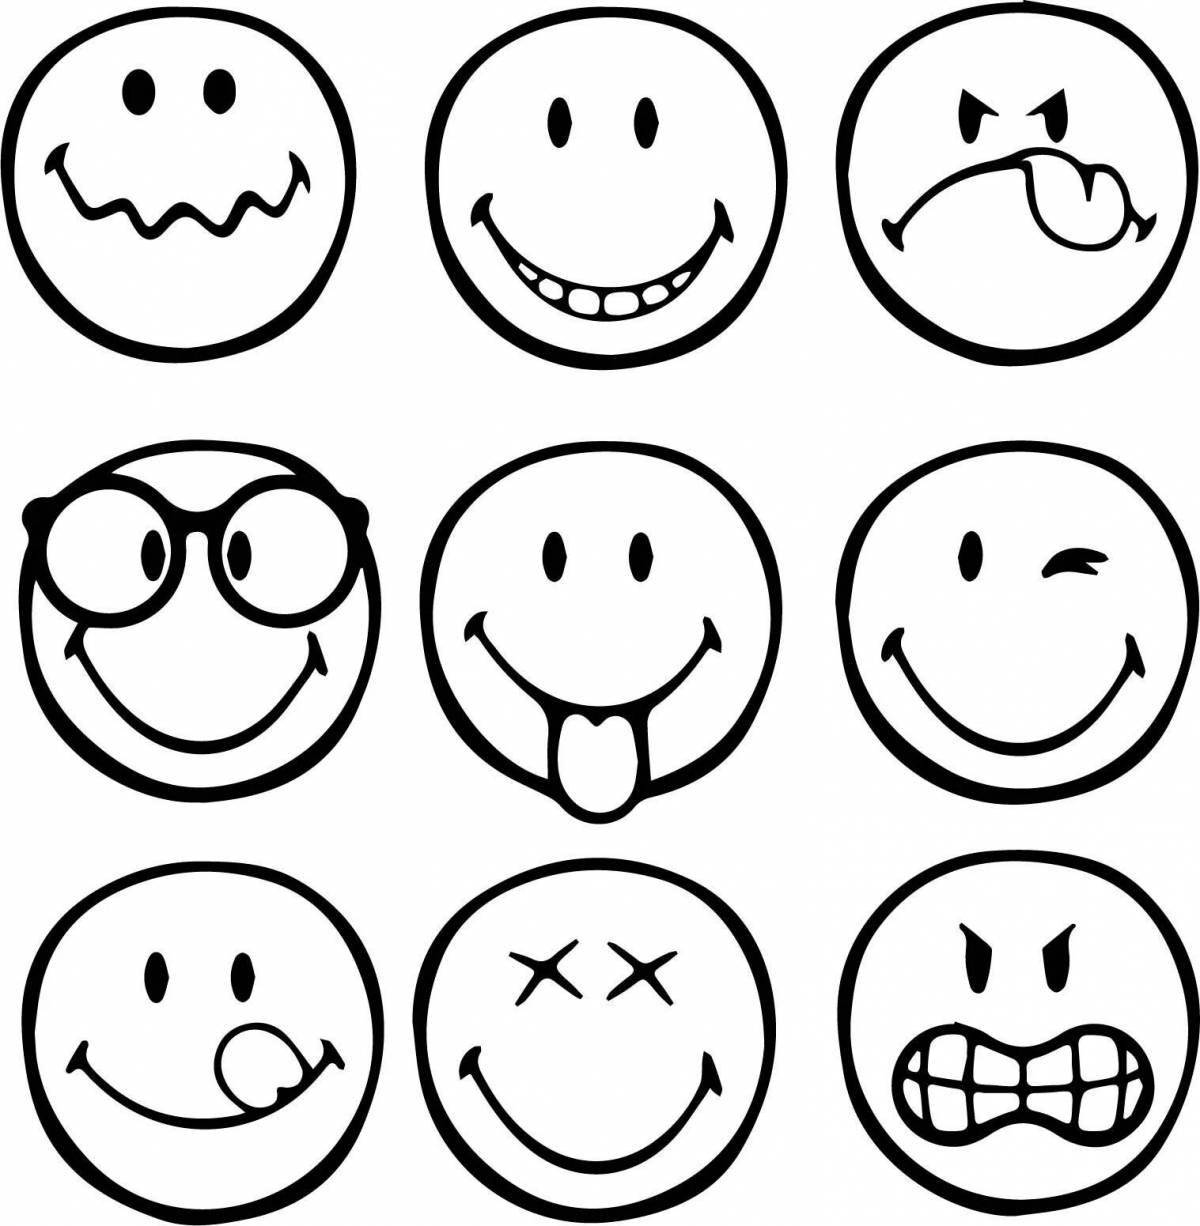 Indie kid smiley animated coloring page